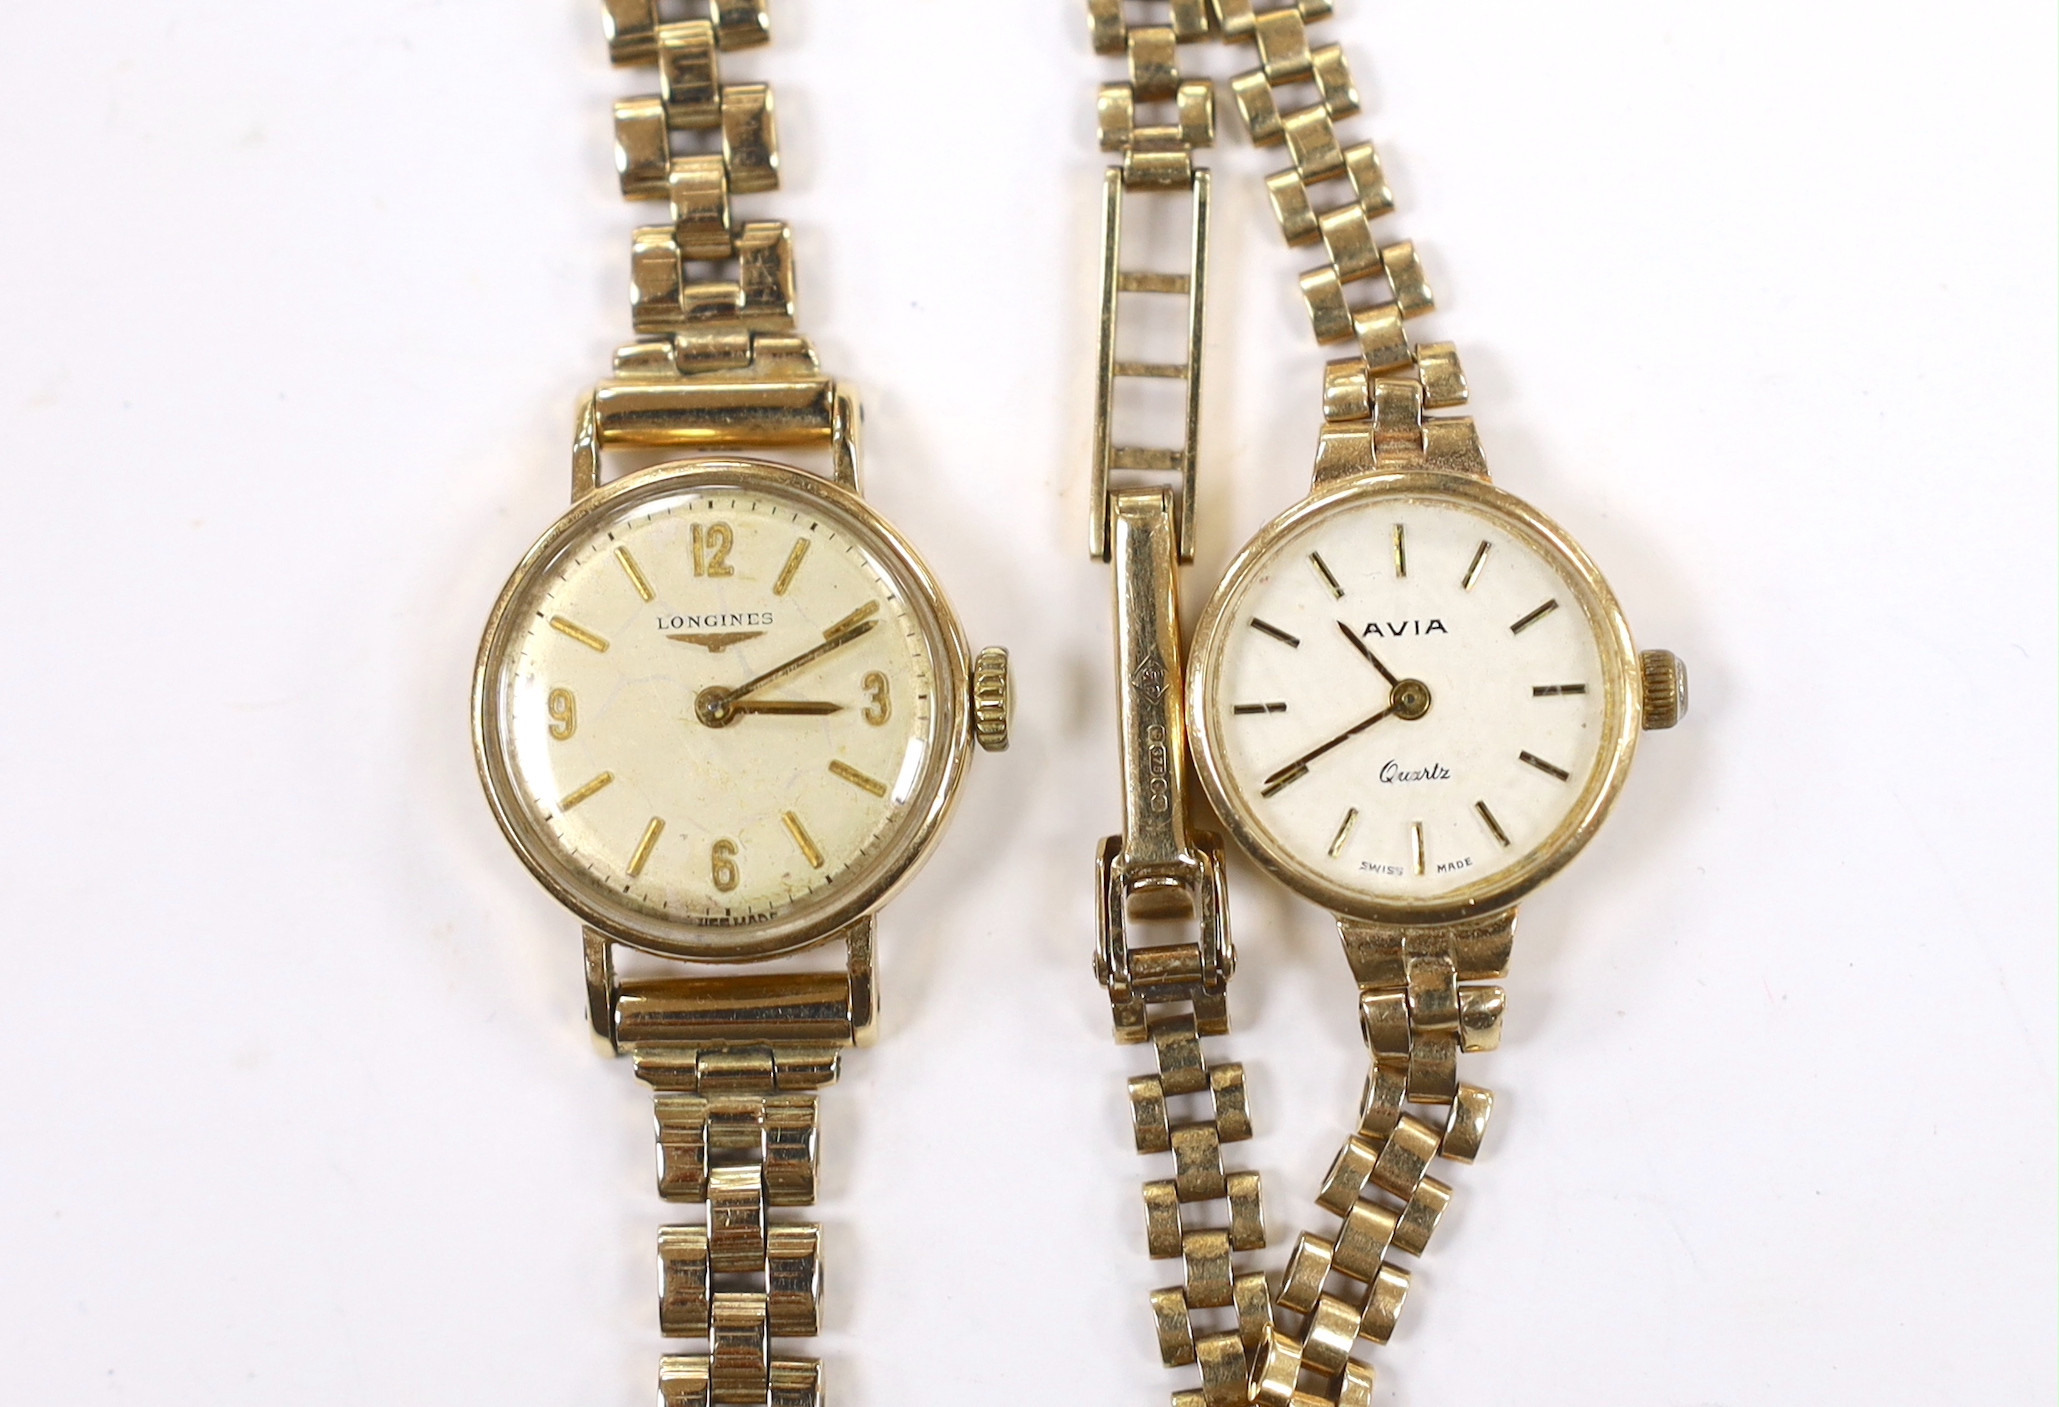 A lady's 9ct gold Longines manual wind wrist watch, on a 9ct gold bracelet and a similar Avia quartz wrist watch, gross weight 34.1 grams.